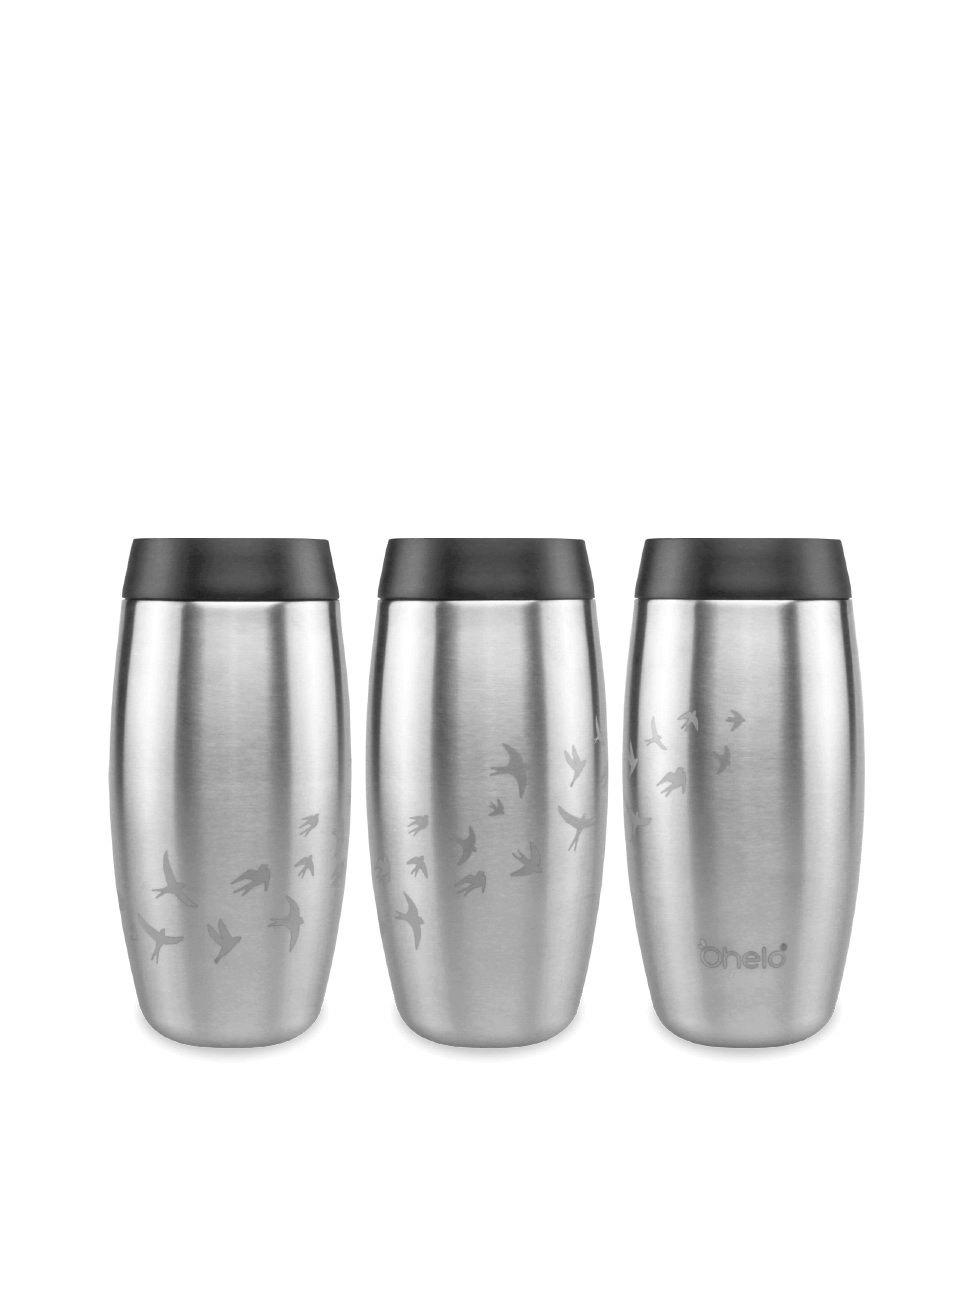 Ohelo stainless steel reusable coffee cup in swallow bird design - image showing design from 3 sides